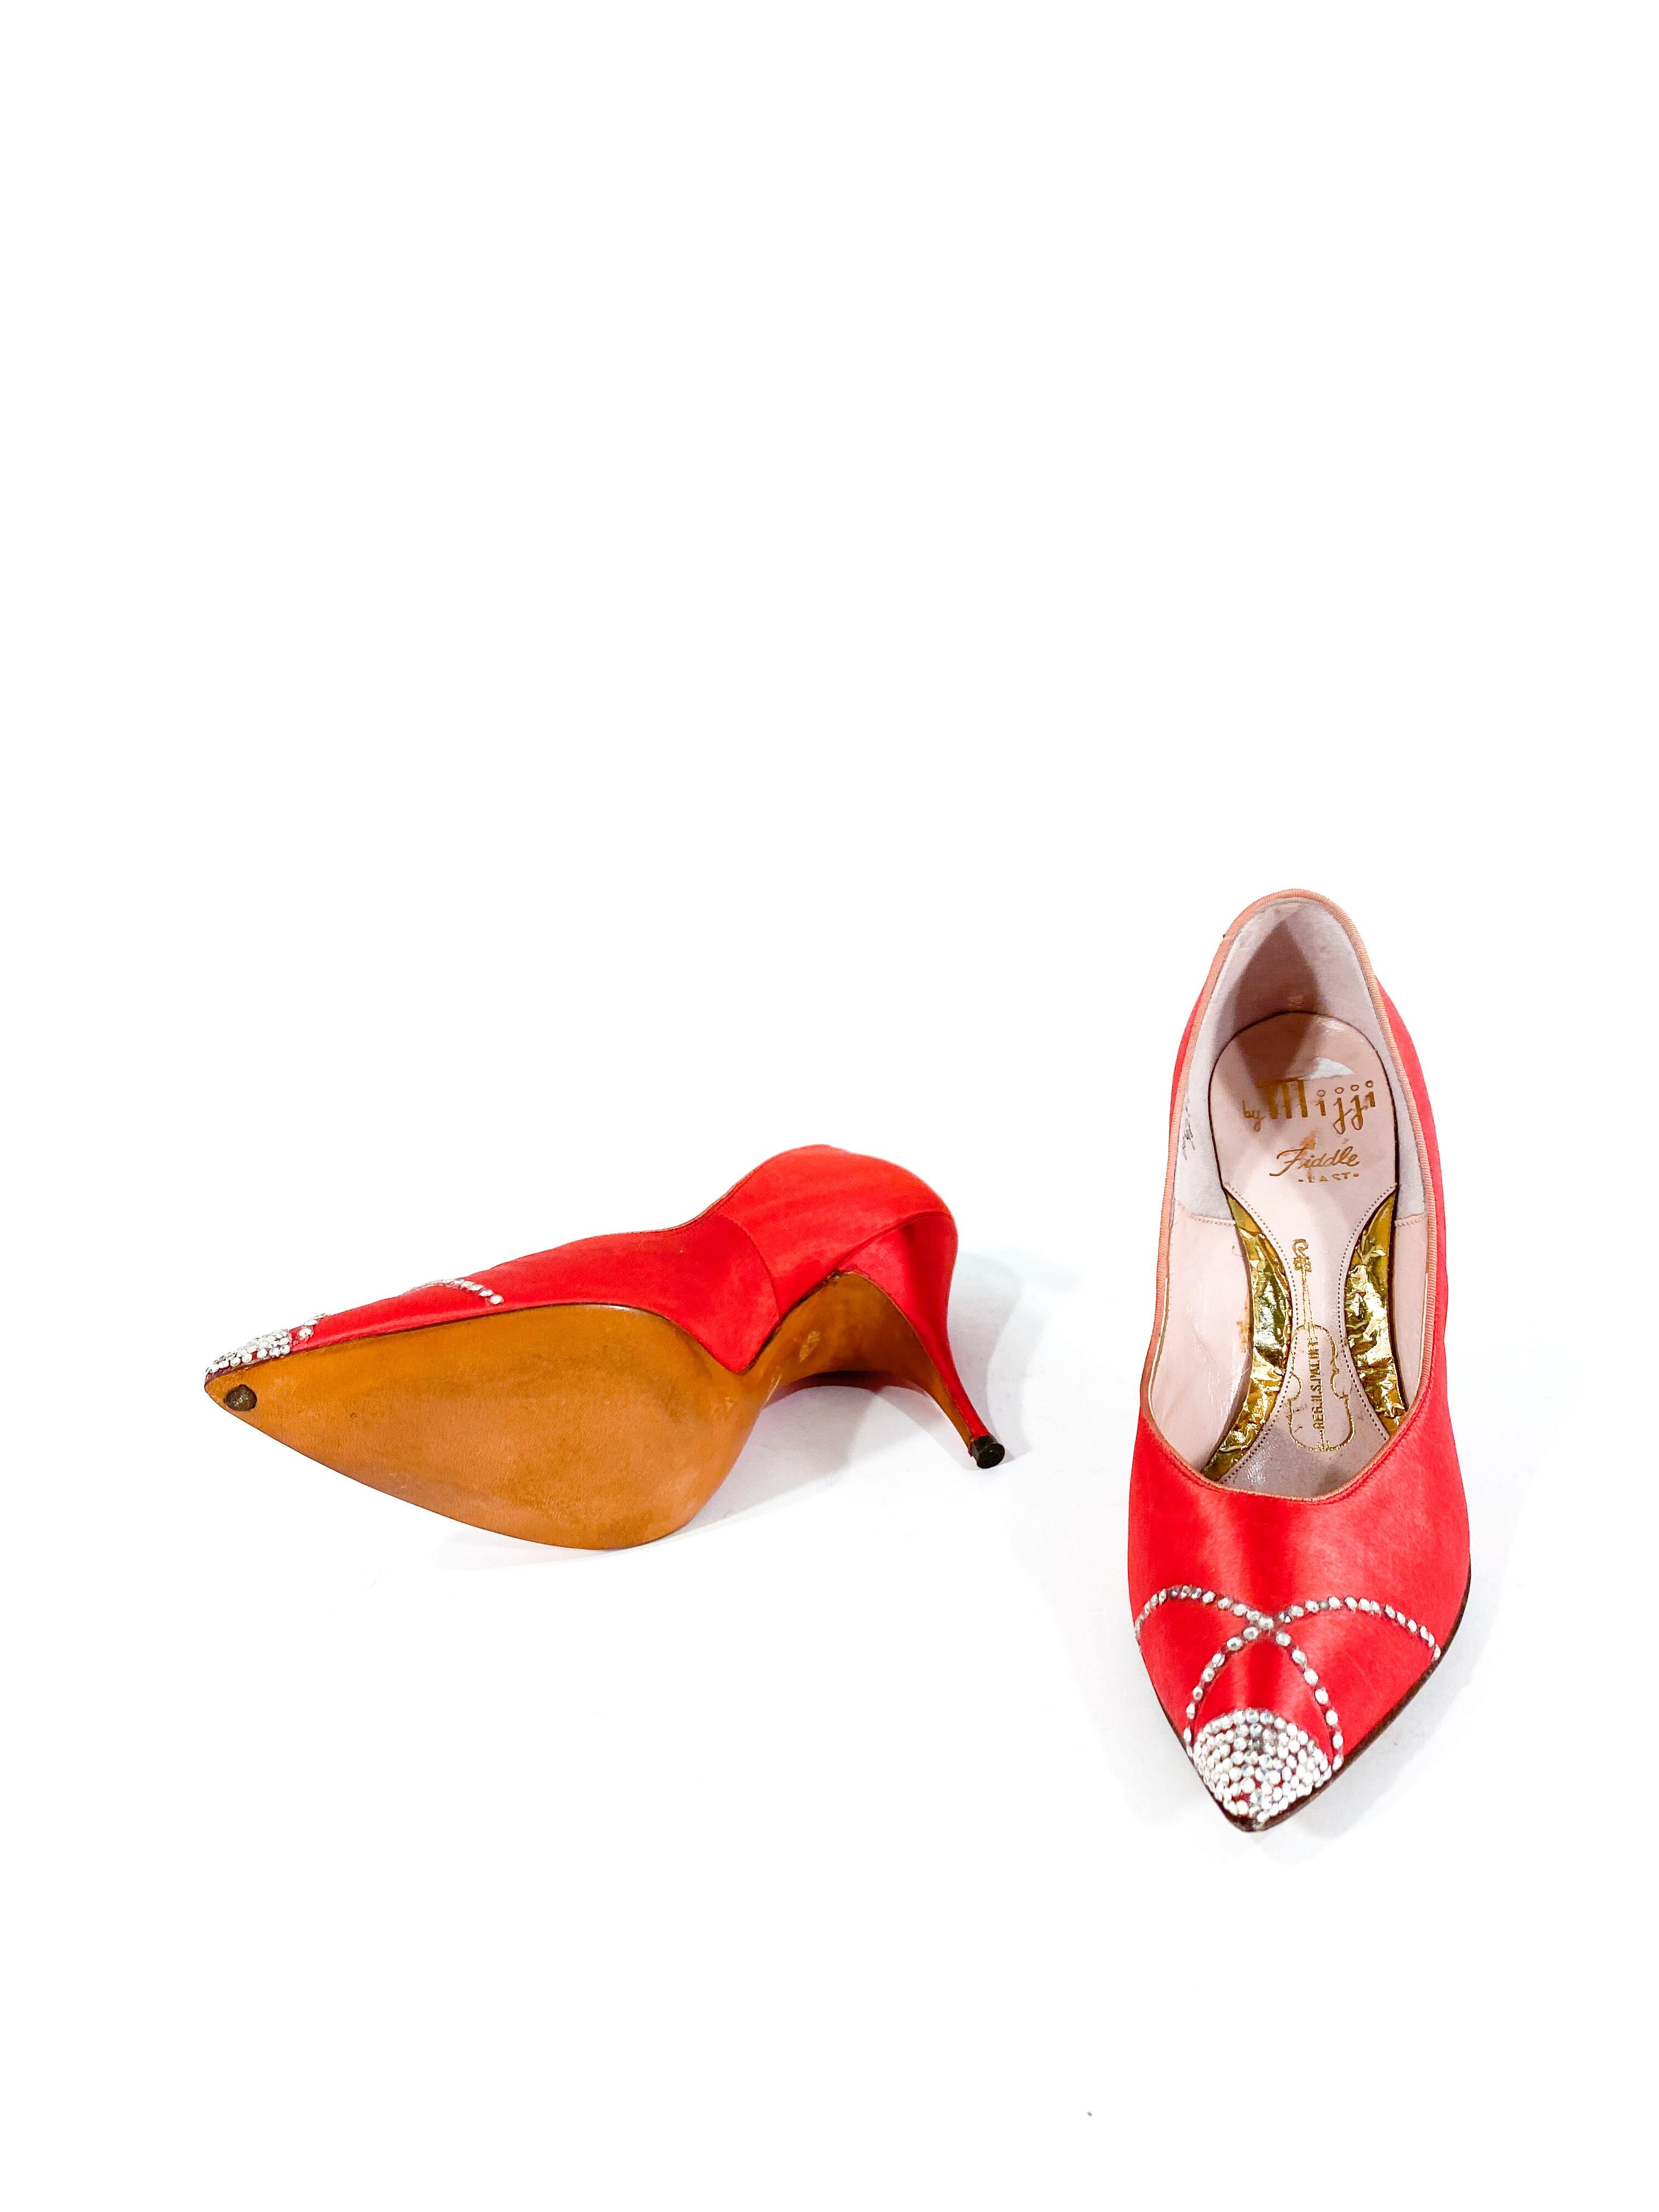 1960s Red Satin Stiletto Heels With Rhinestone Accents In Good Condition For Sale In San Francisco, CA